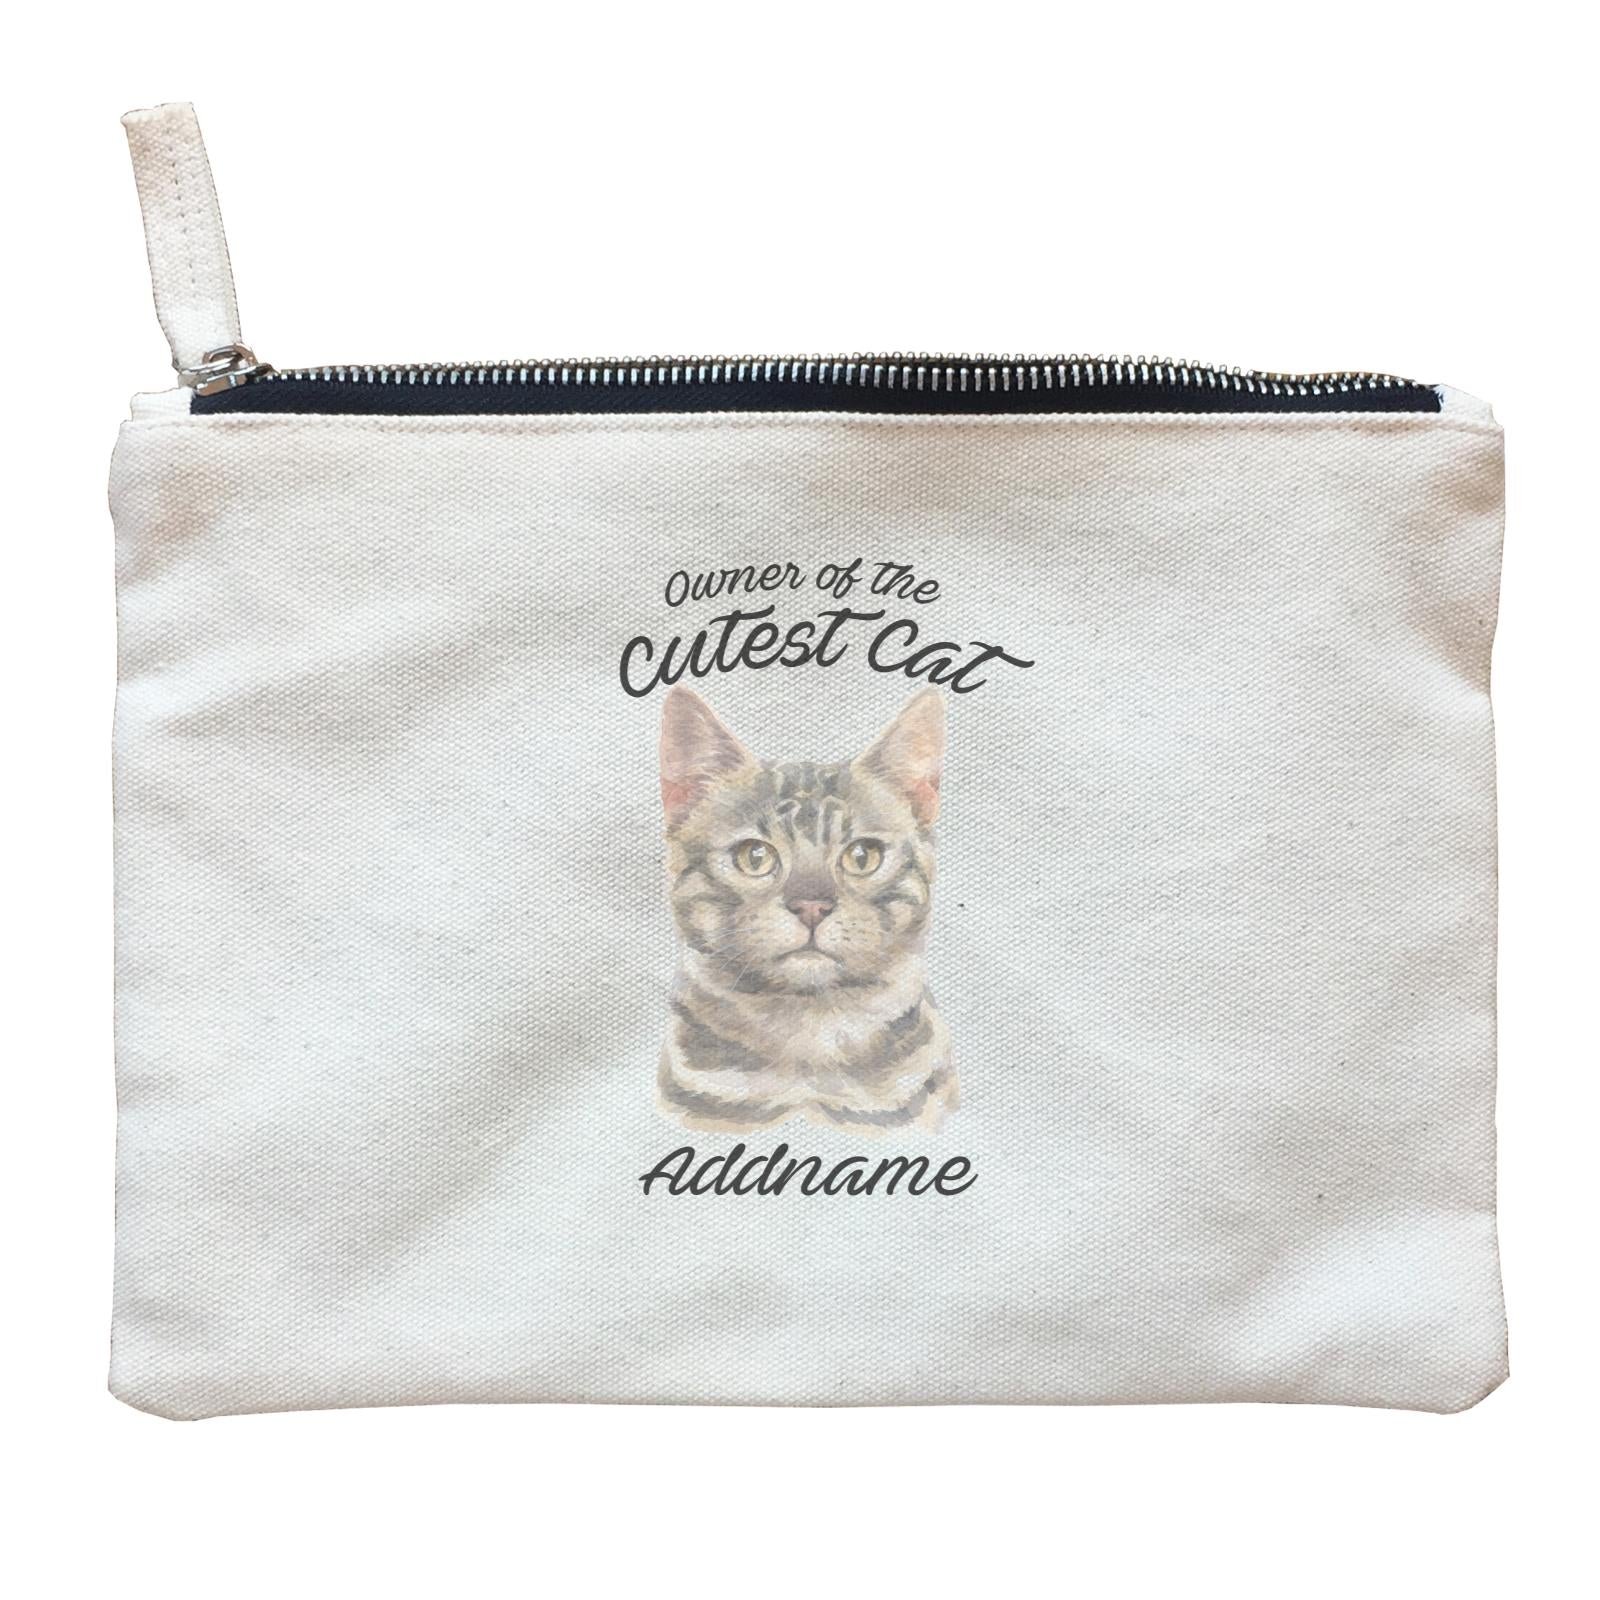 Watercolor Owner Of The Cutest Cat Bengal Grey Addname Zipper Pouch